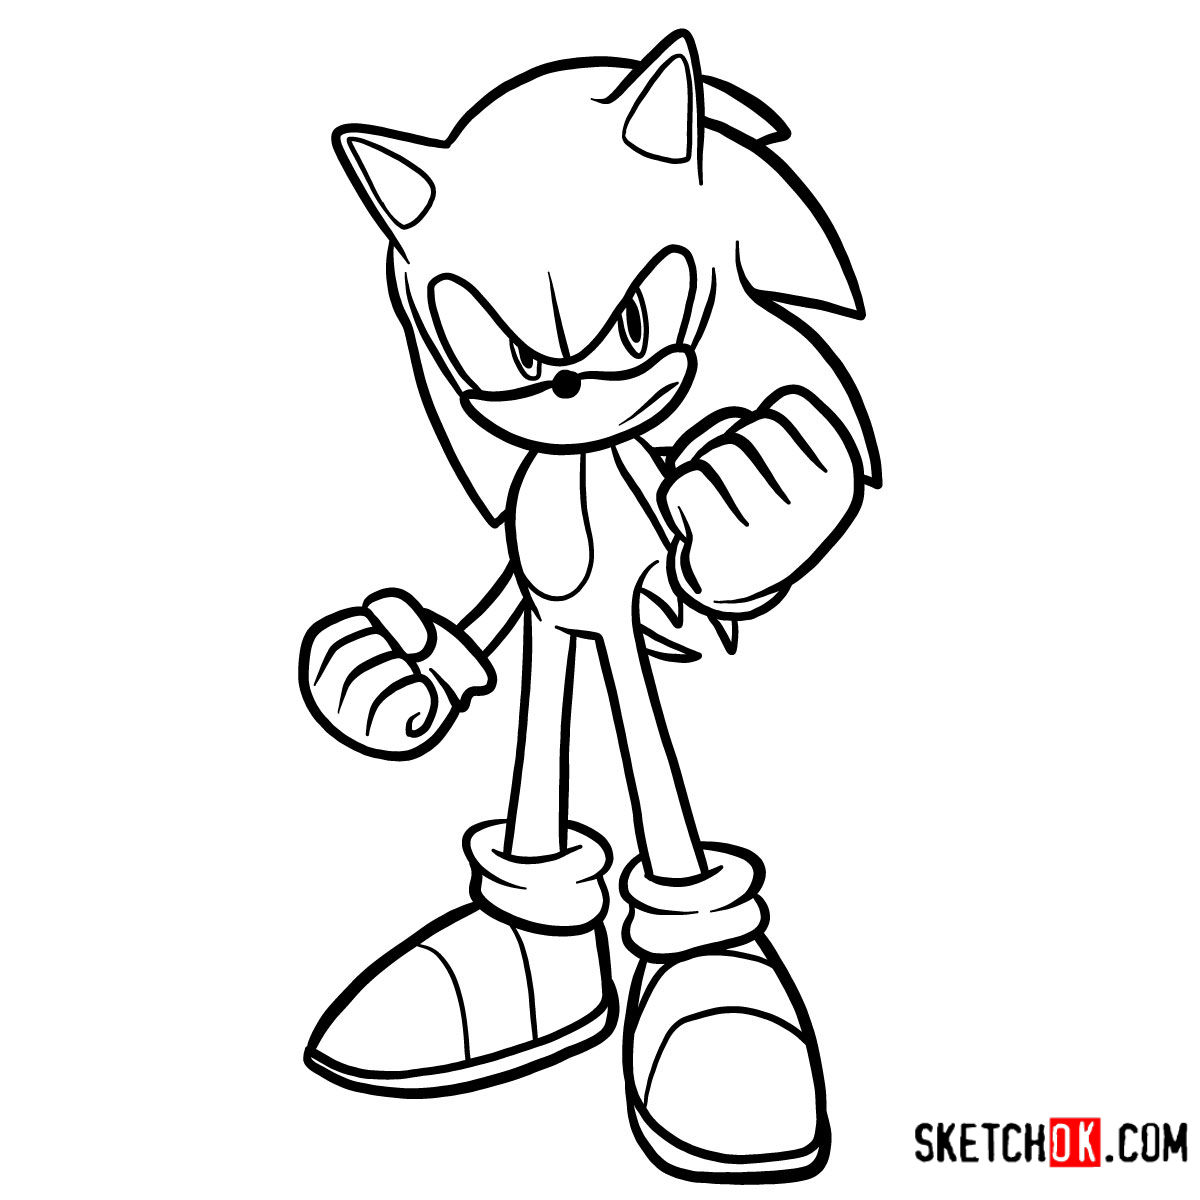 Best of Sonic the hedgehog pictures to draw